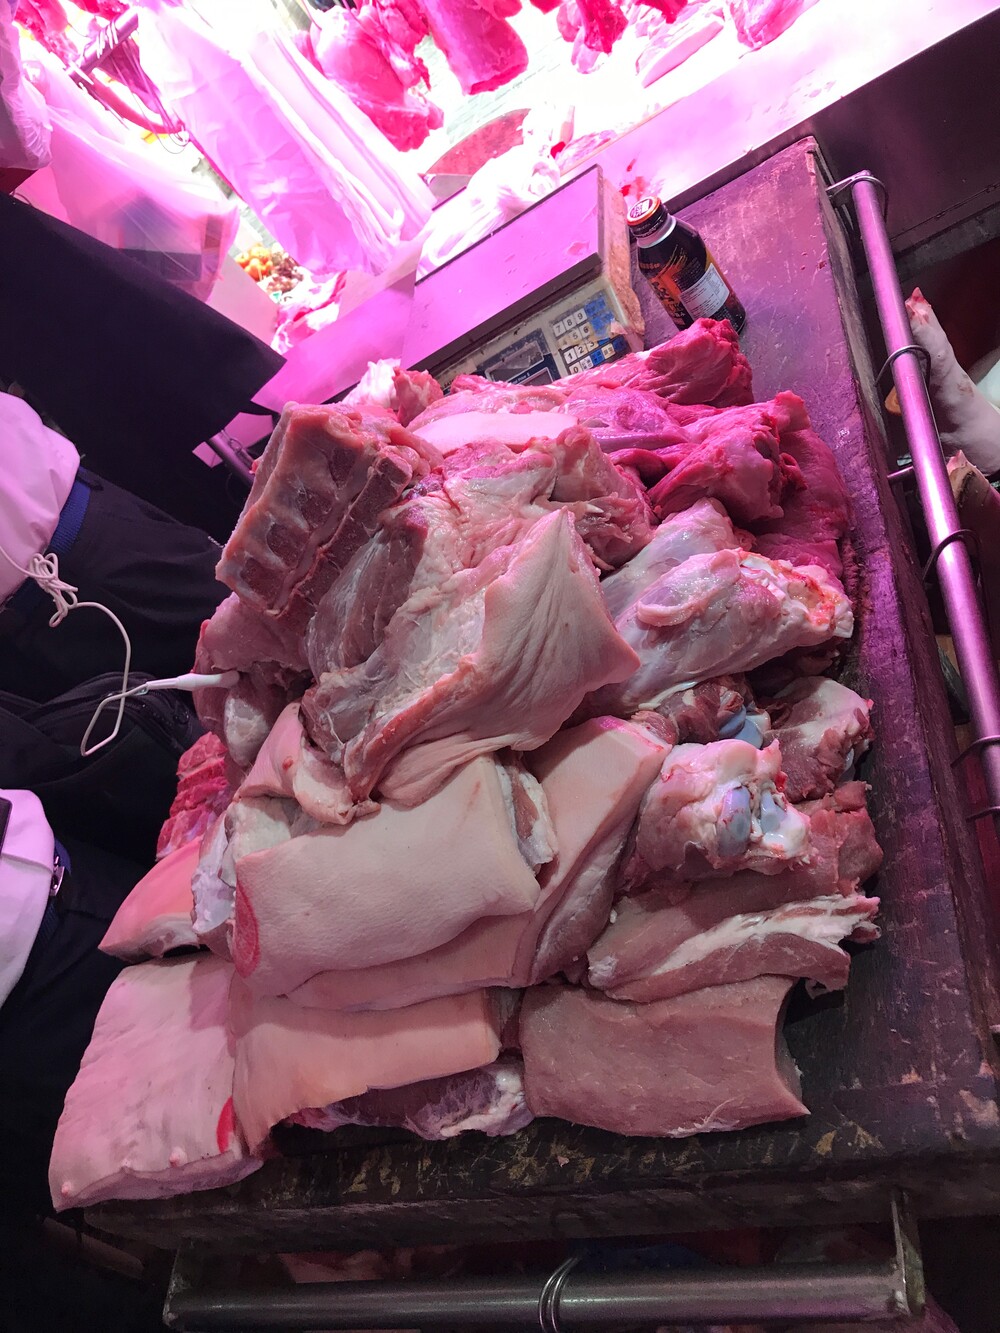 Shops suspected of selling chilled meat as fresh meat